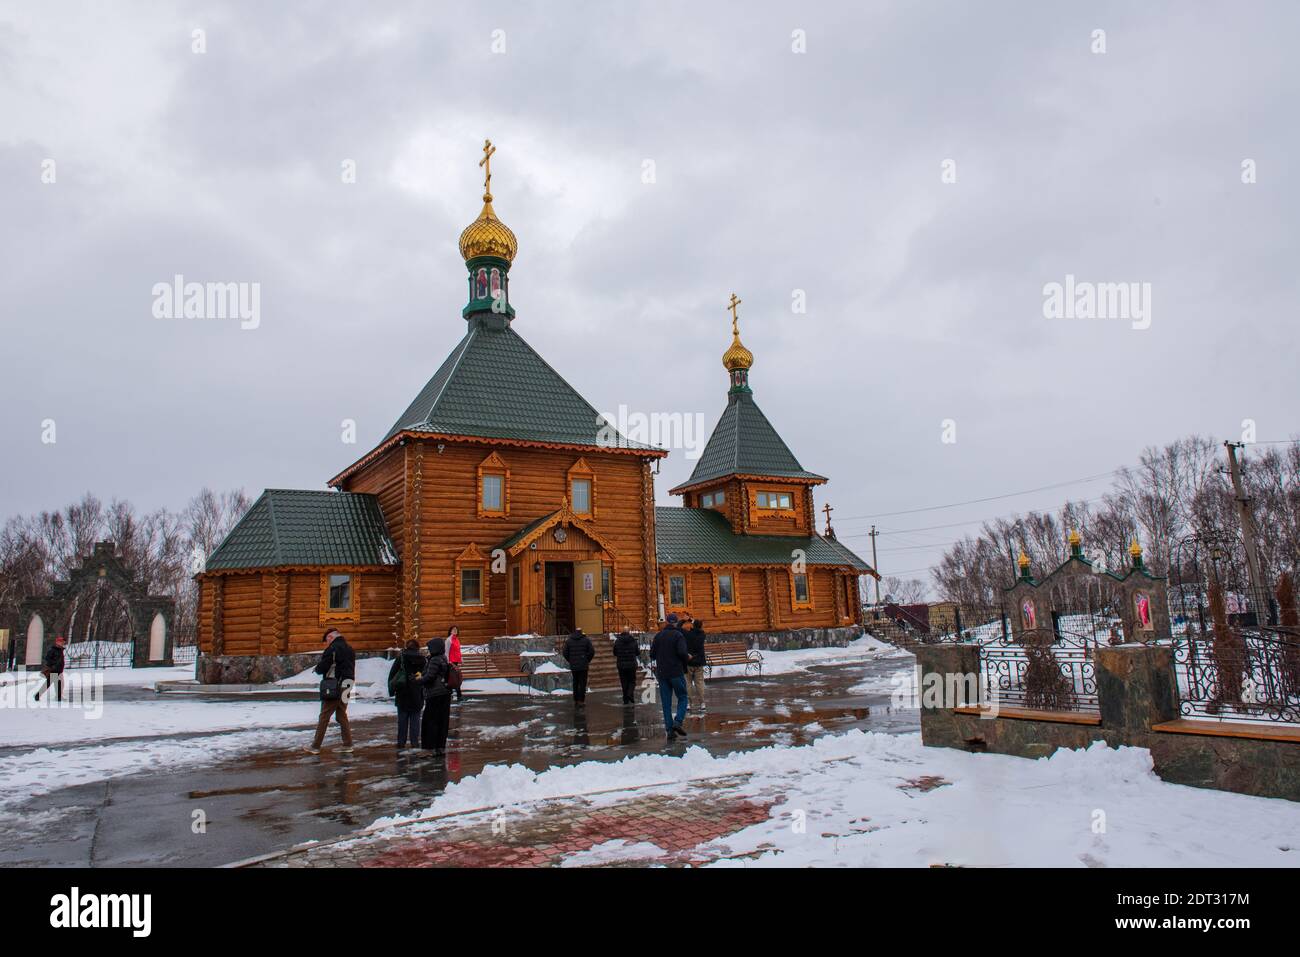 Korsakov, Russia -- April 17, 2016. A wide angle photo of tourists visiting a traditional Russian Orthodox Church in Korsakov on a gray snowy day. Stock Photo